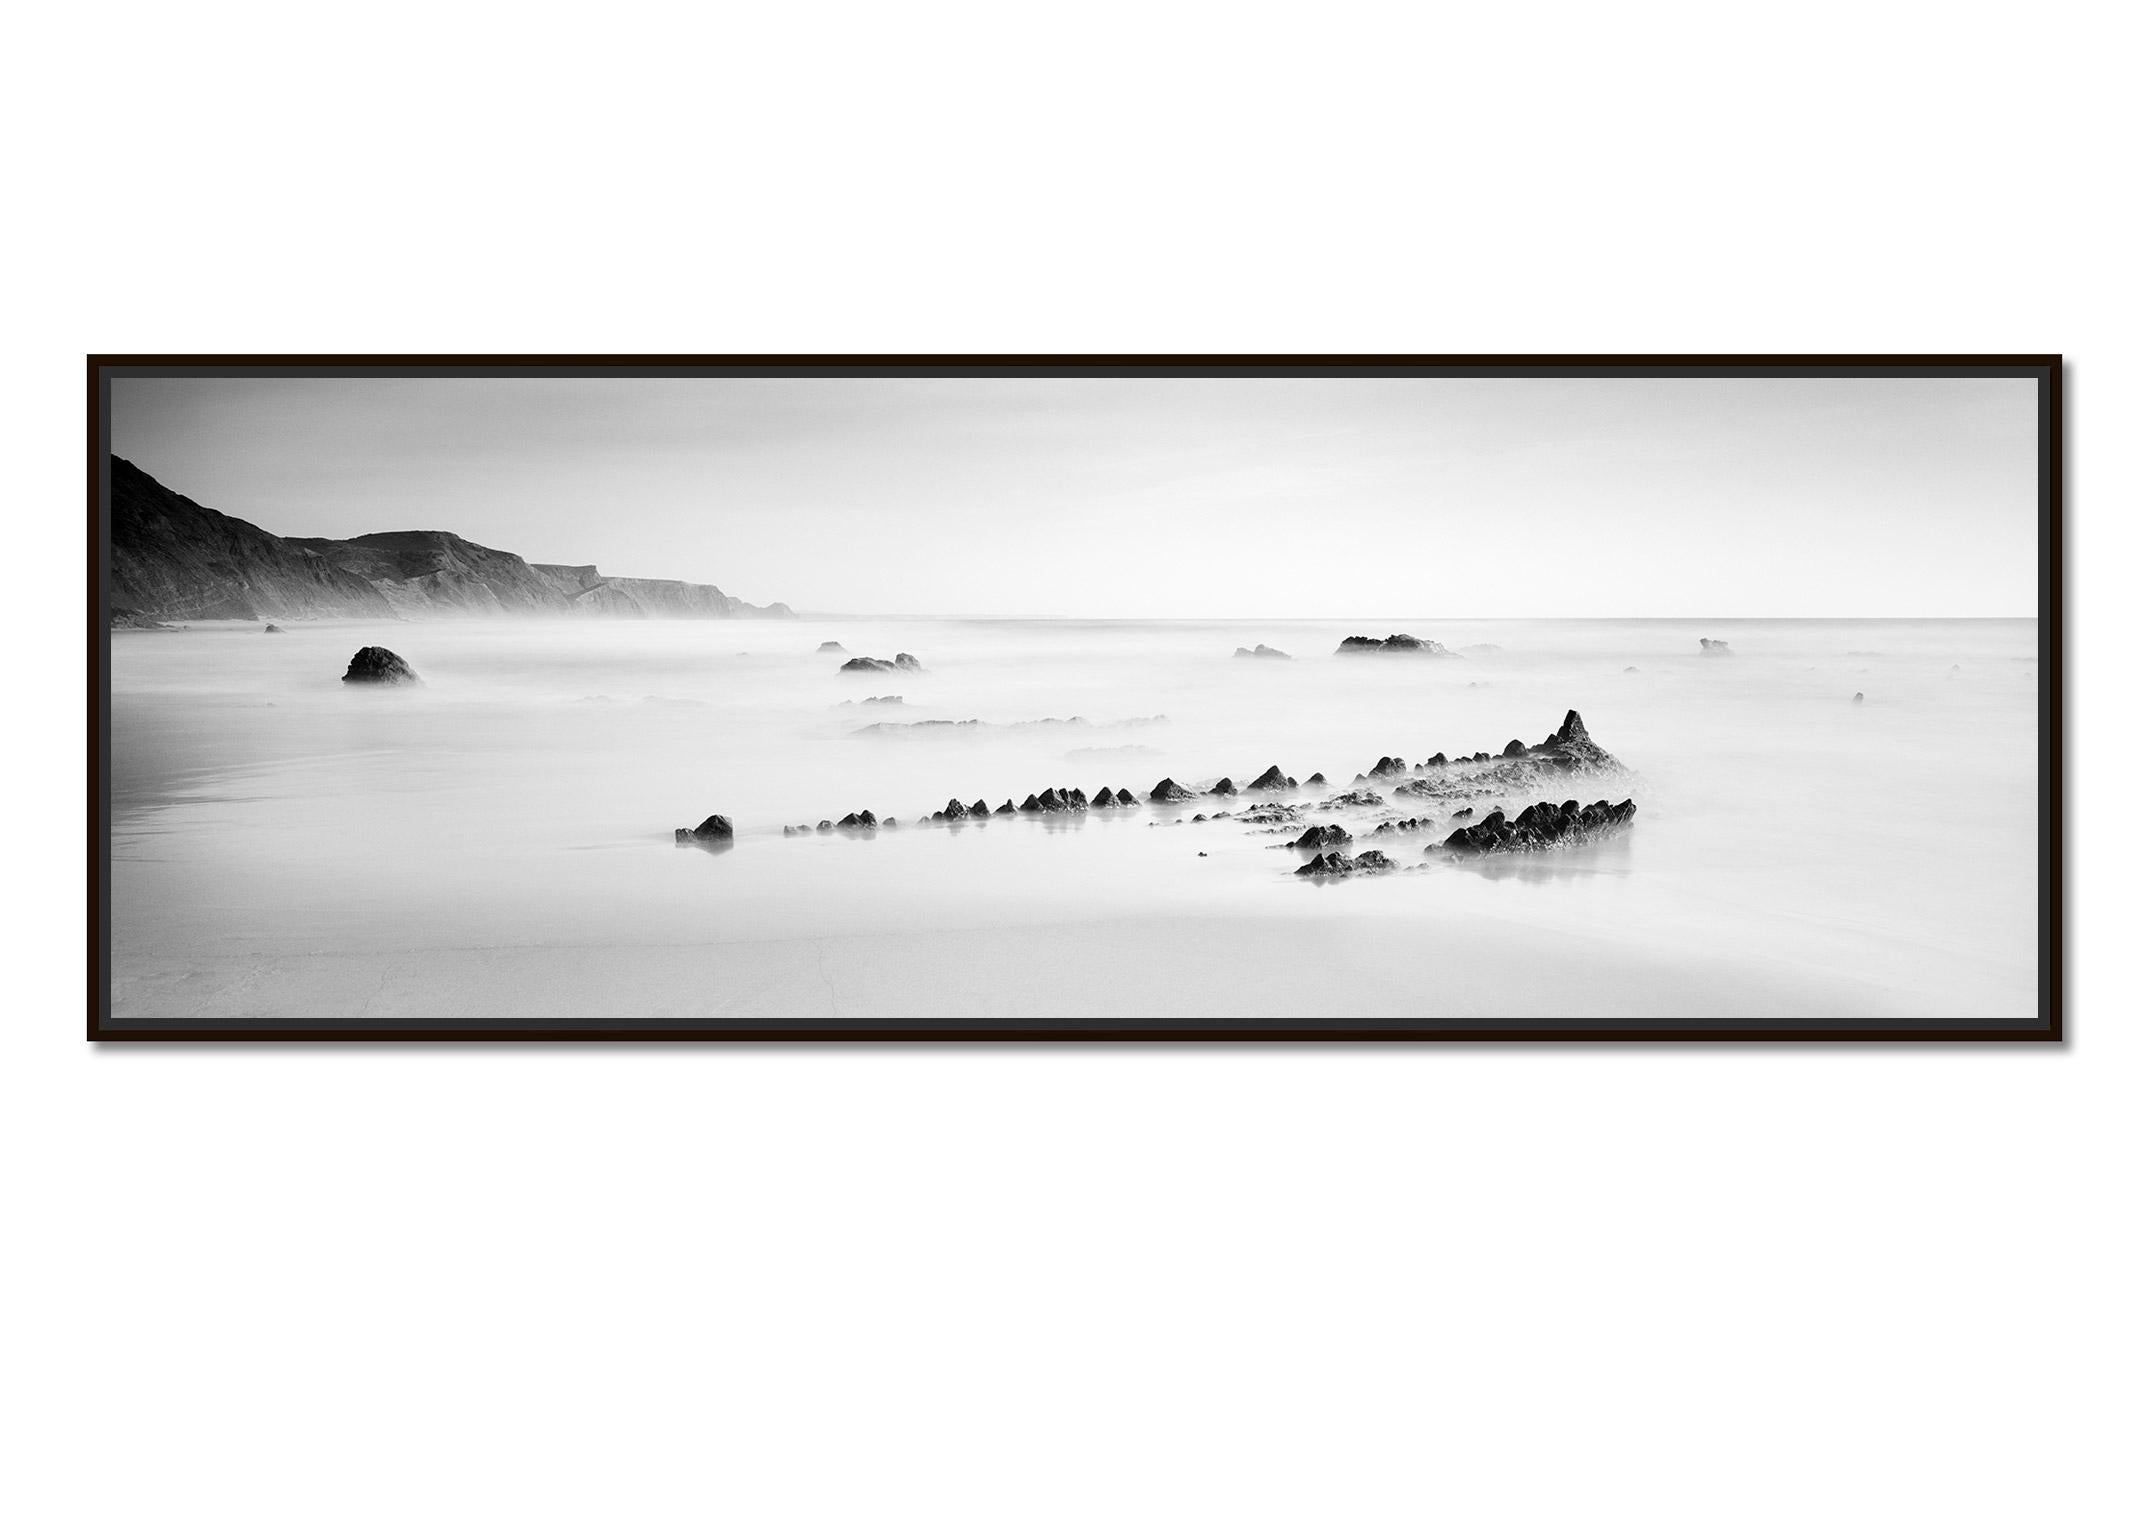 Fishbones Panorama, Beach, Shoreline, Portugal, black and white landscape print - Photograph by Gerald Berghammer